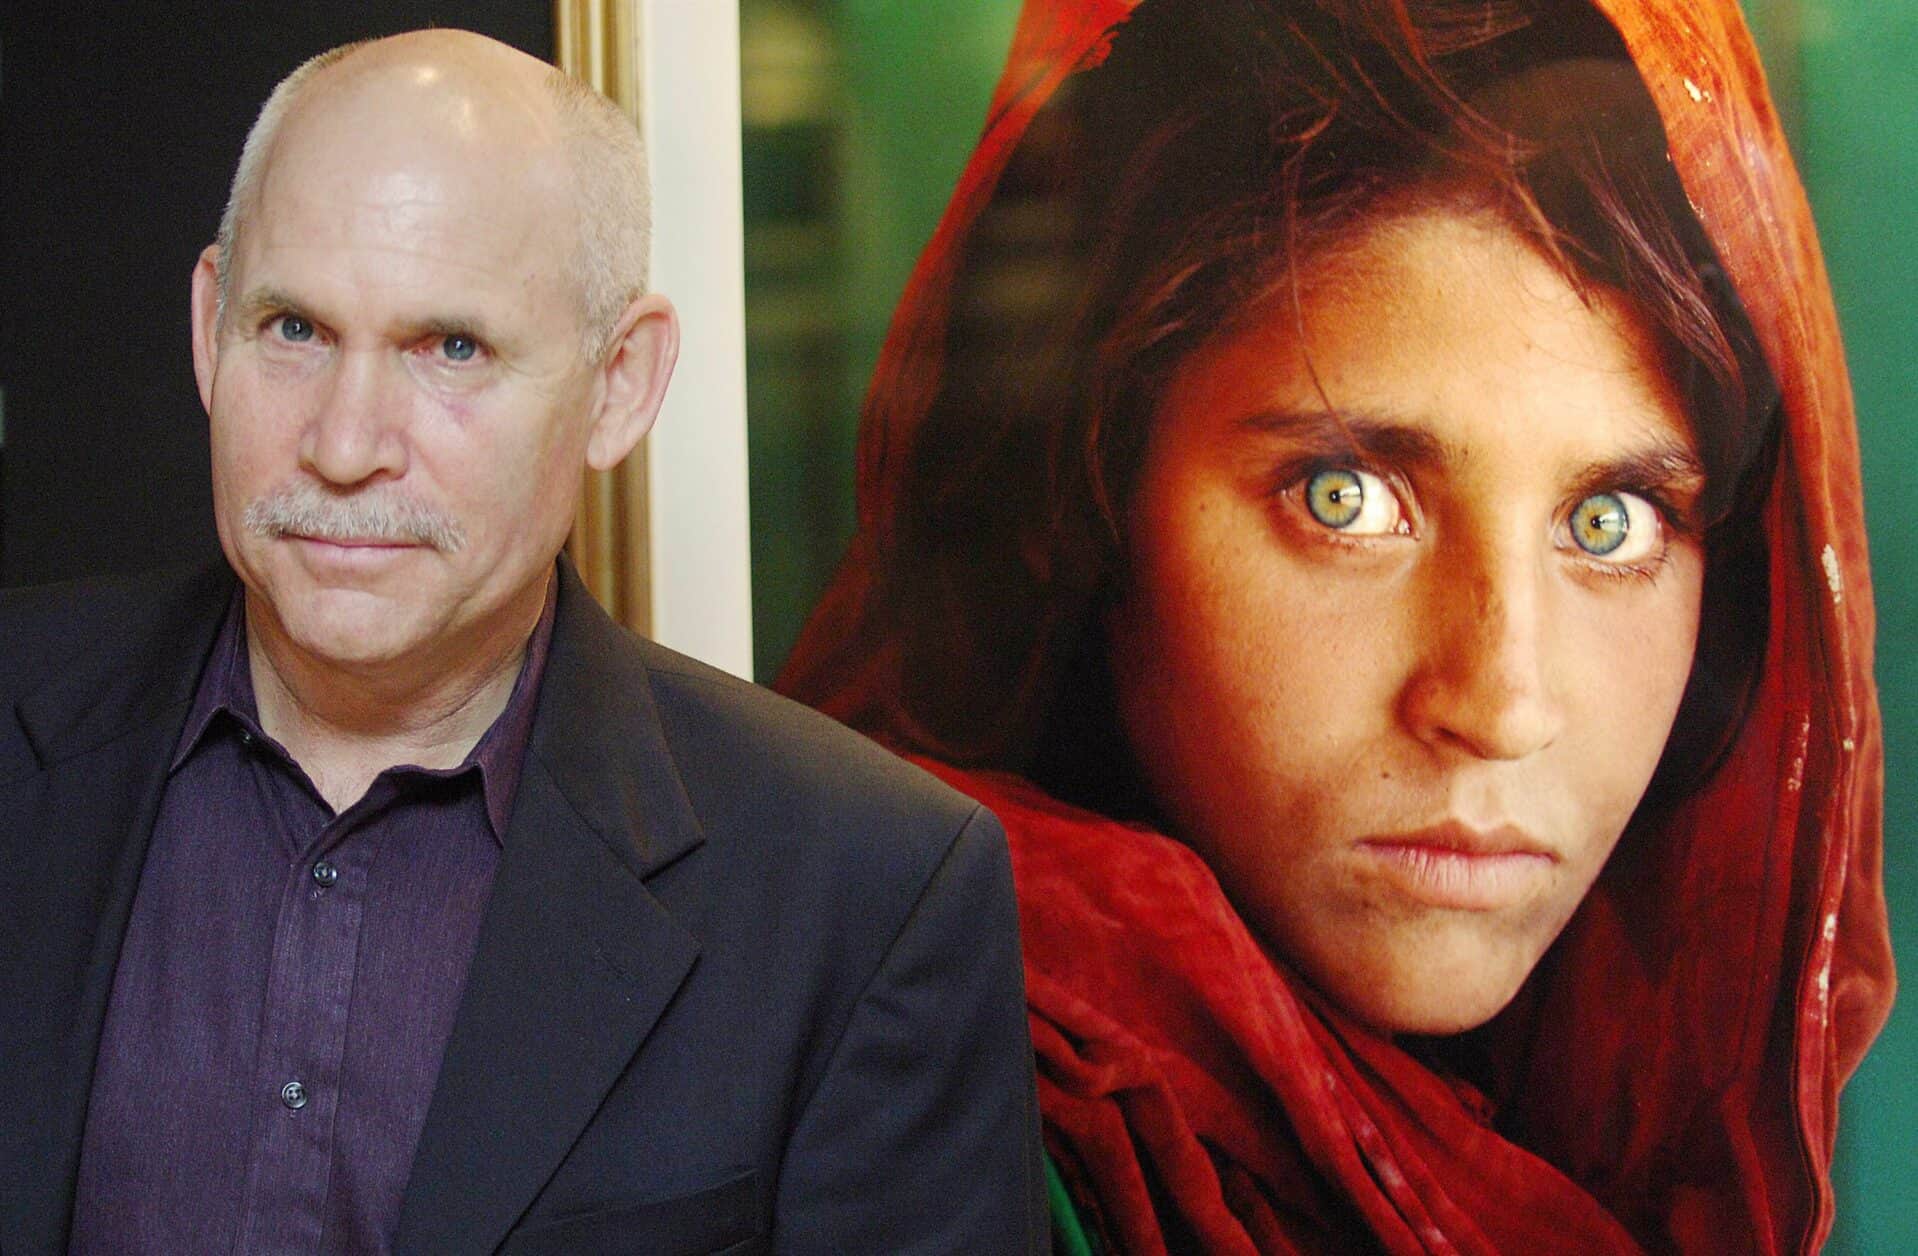 Steve McCurry showcases one of his famous photograph